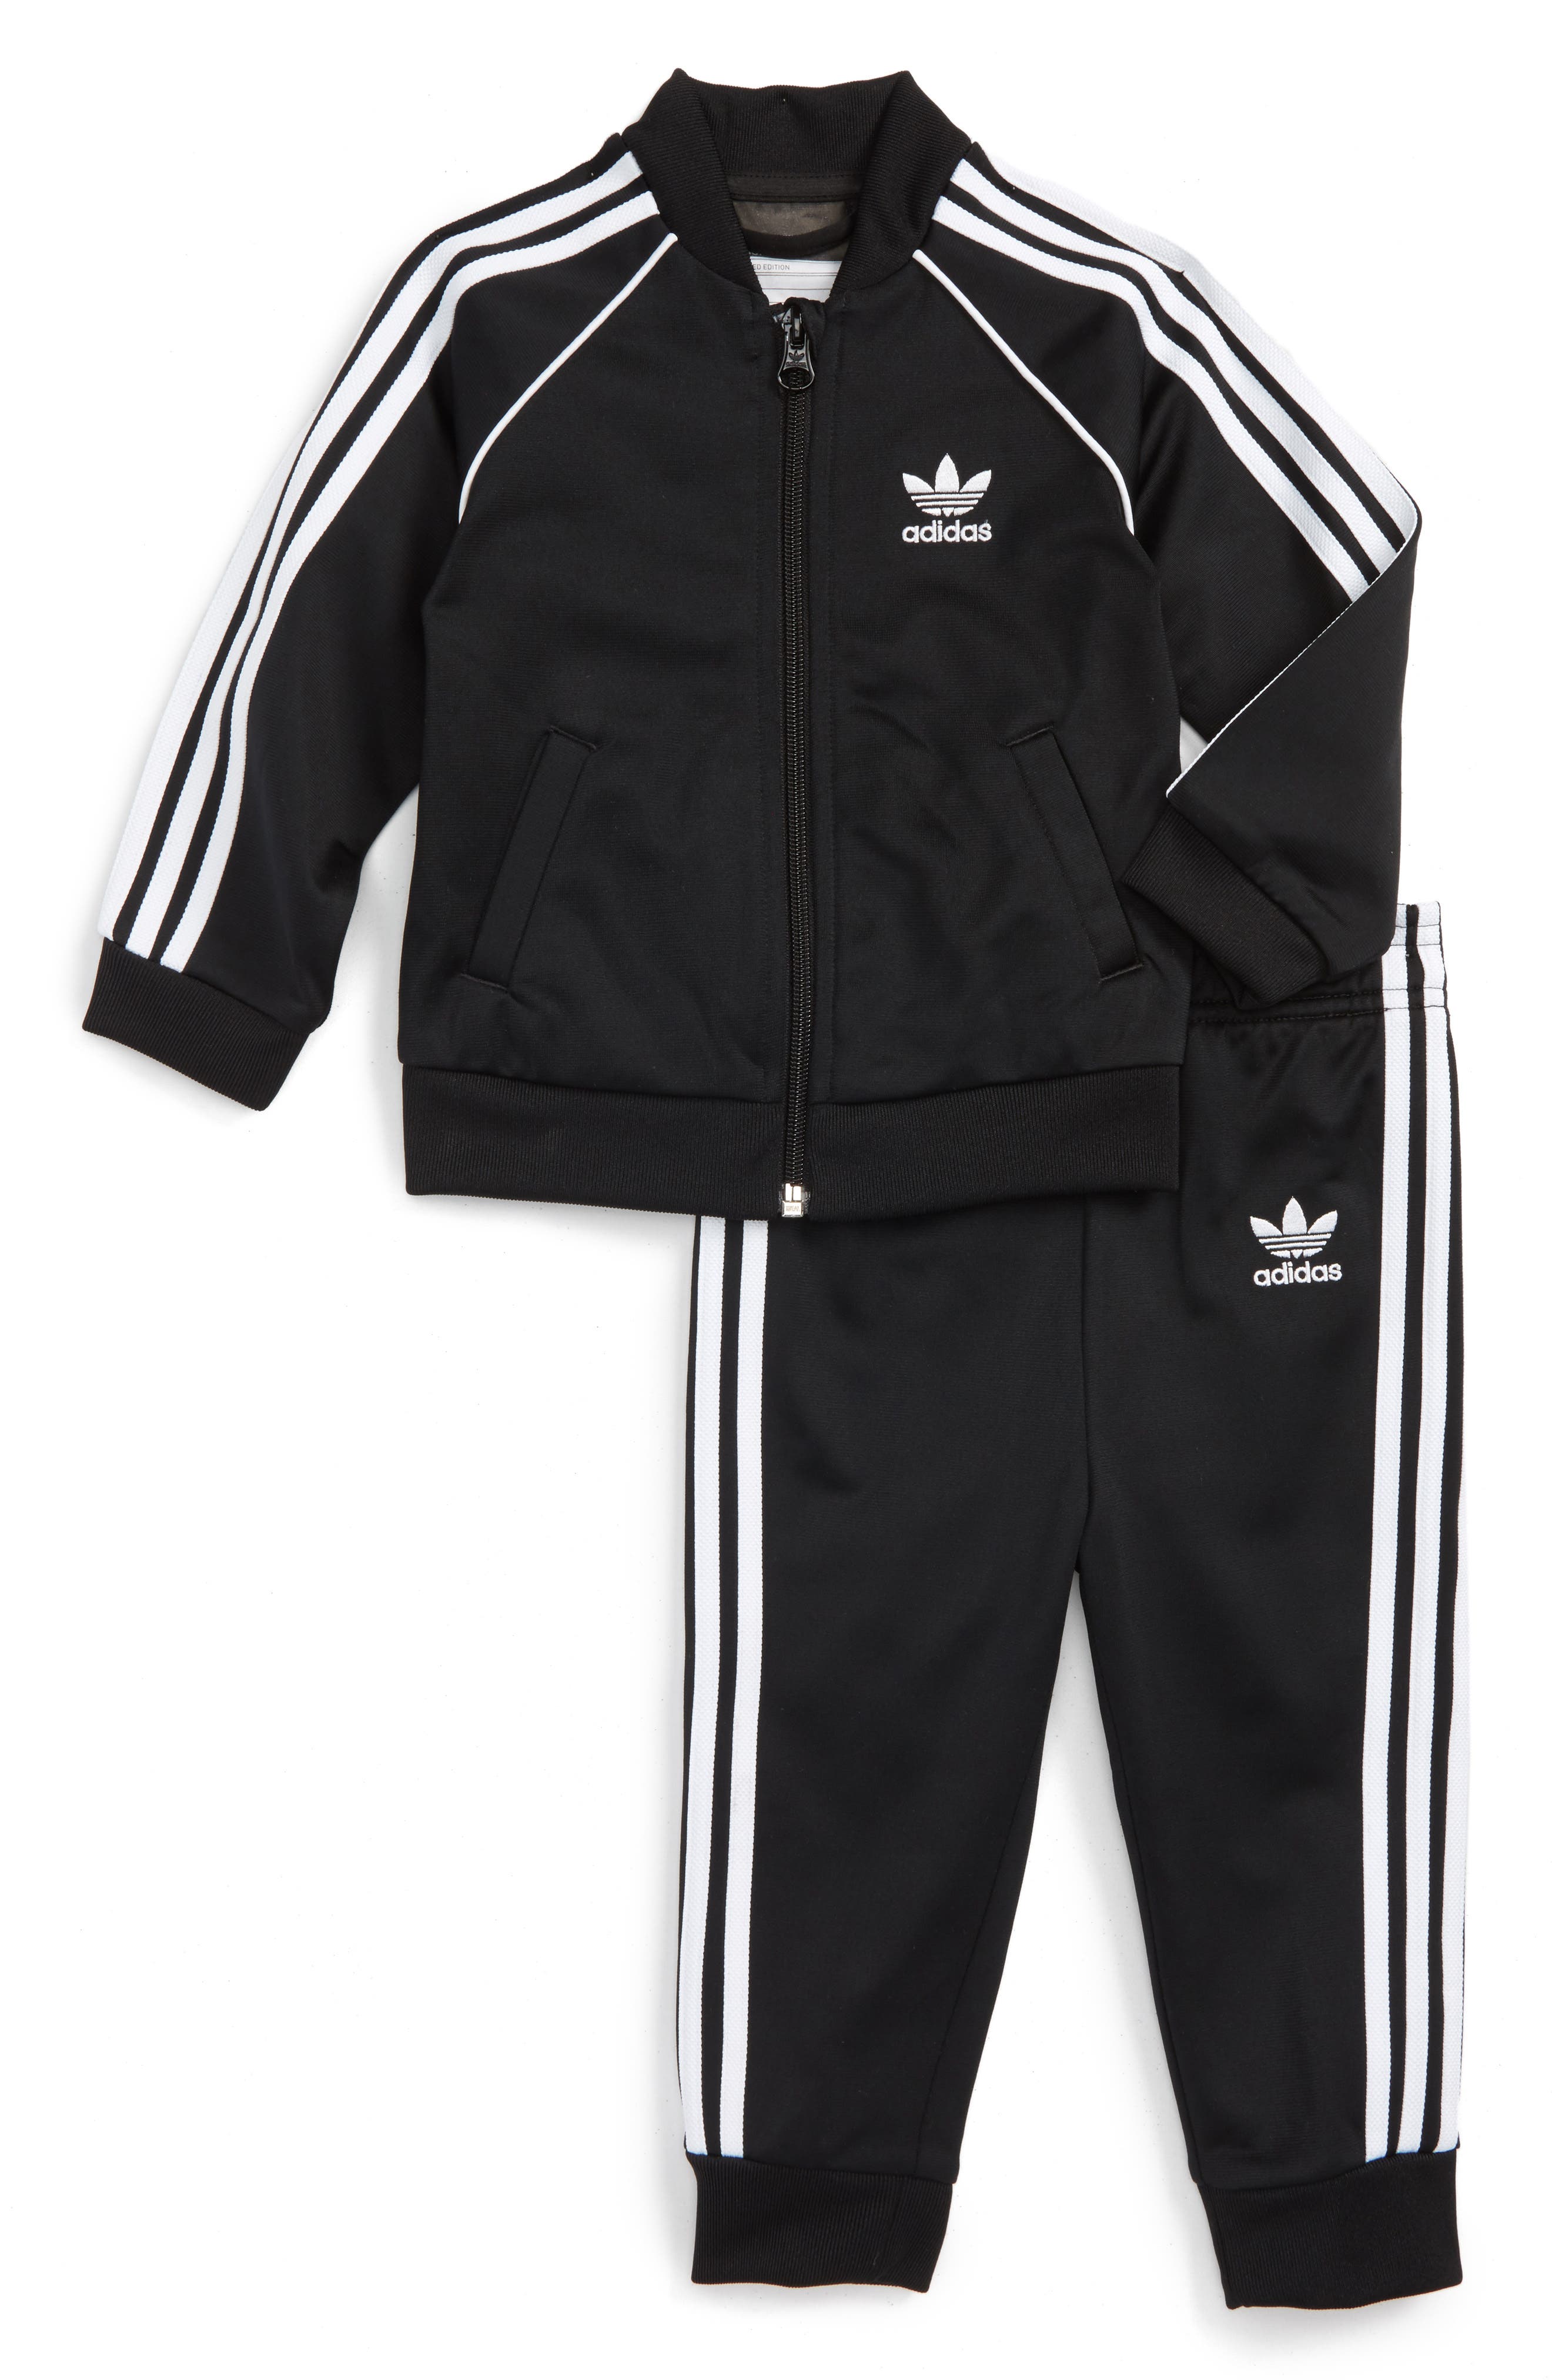 adidas all black tracksuit, Up to 50% Off adidas Shoes & Apparel Sale ...